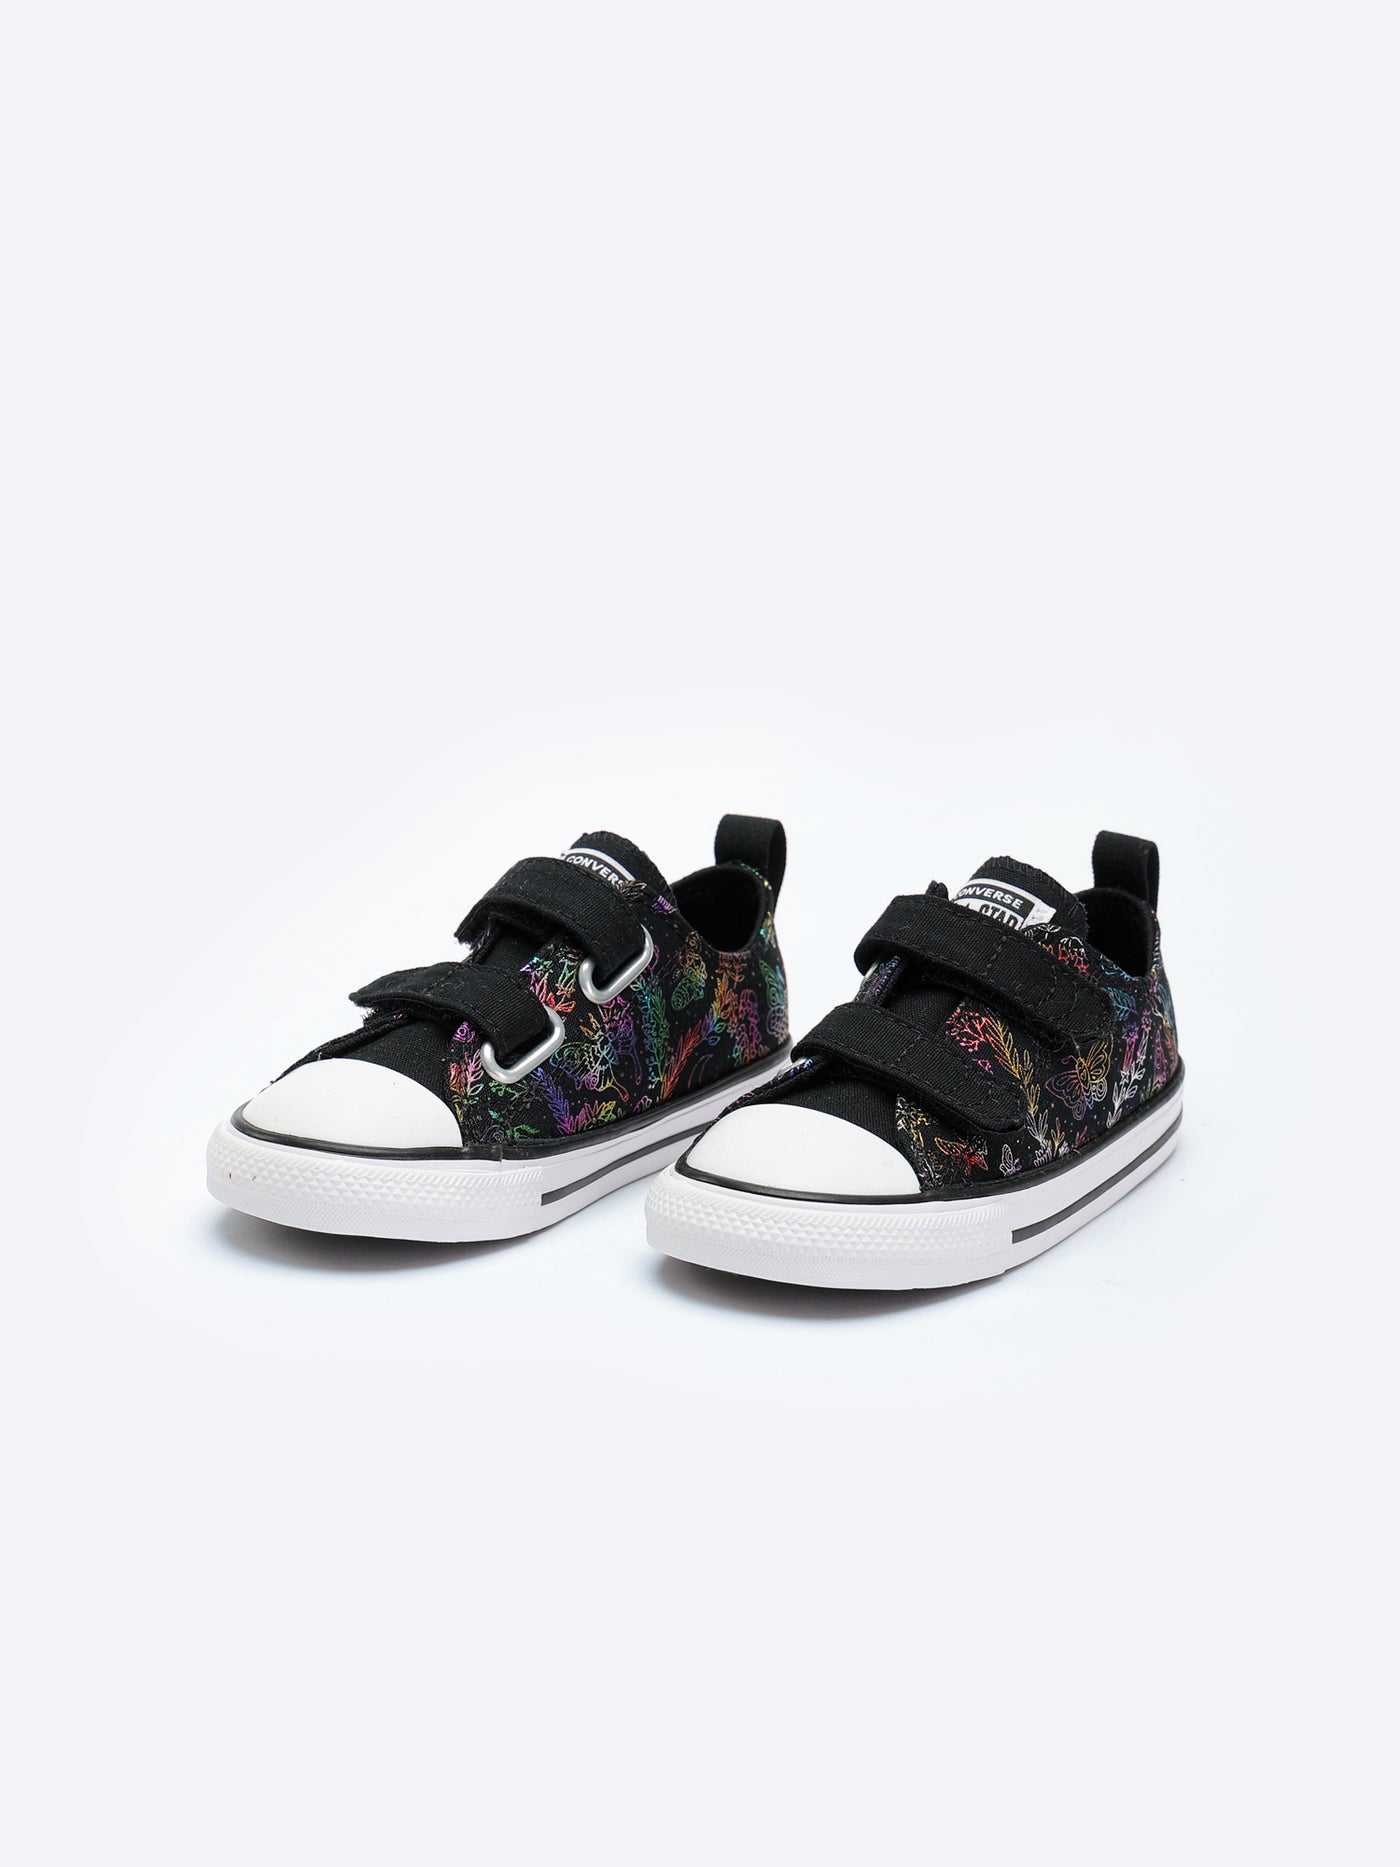 Converse Kids Ctas 2v Iridescent Butterfly Sneakers